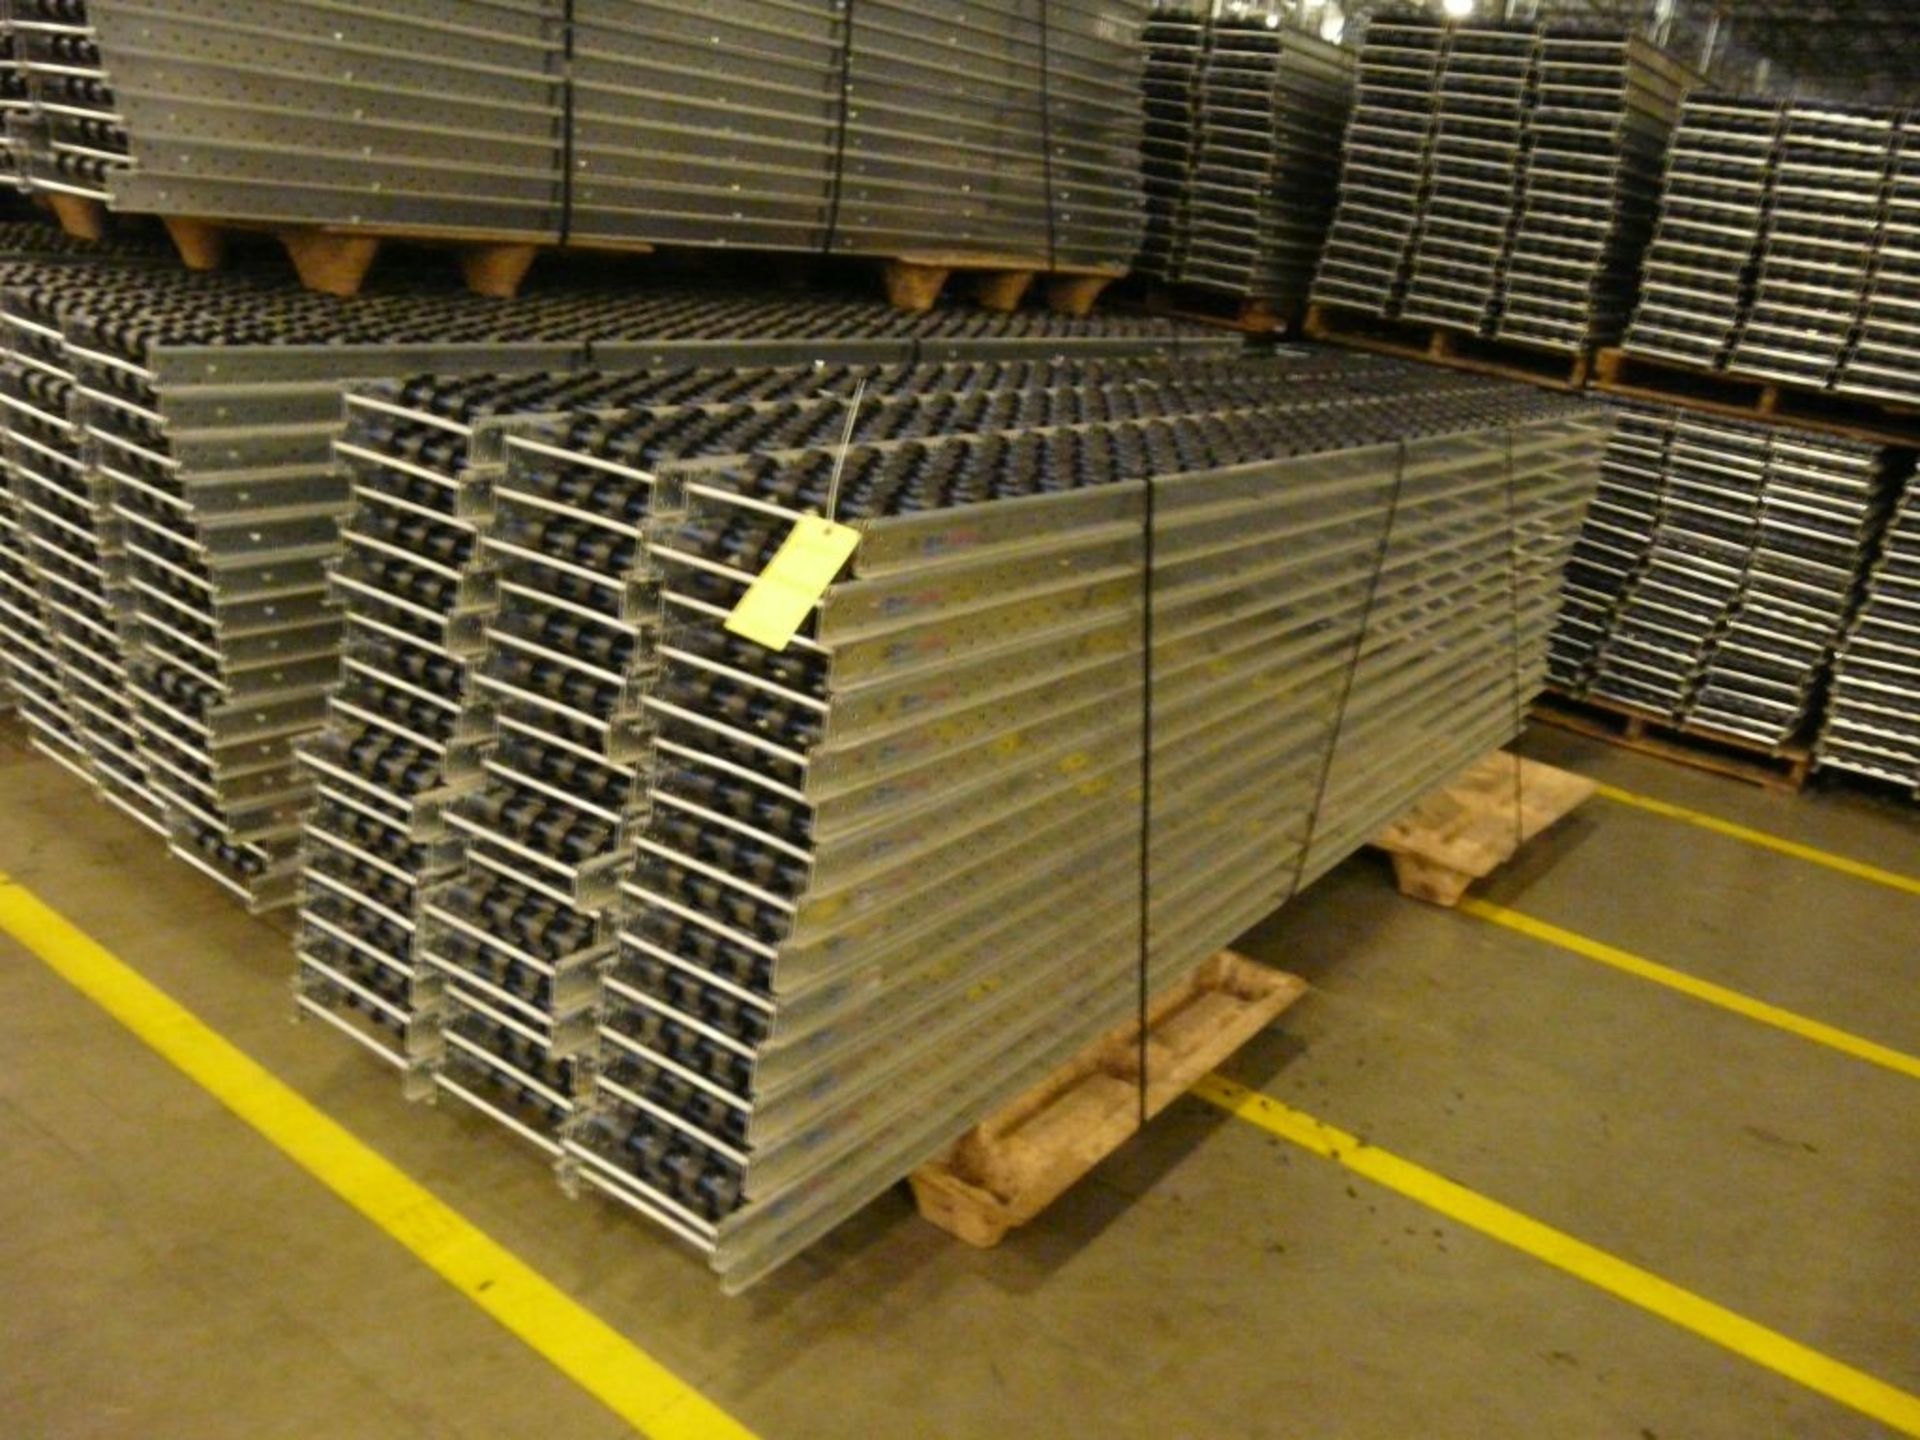 Lot of (90) SpanTrack Wheelbed Carton Flow Conveyors - 11.5'L x 11"W; Tag: 223596 - $30 Lot